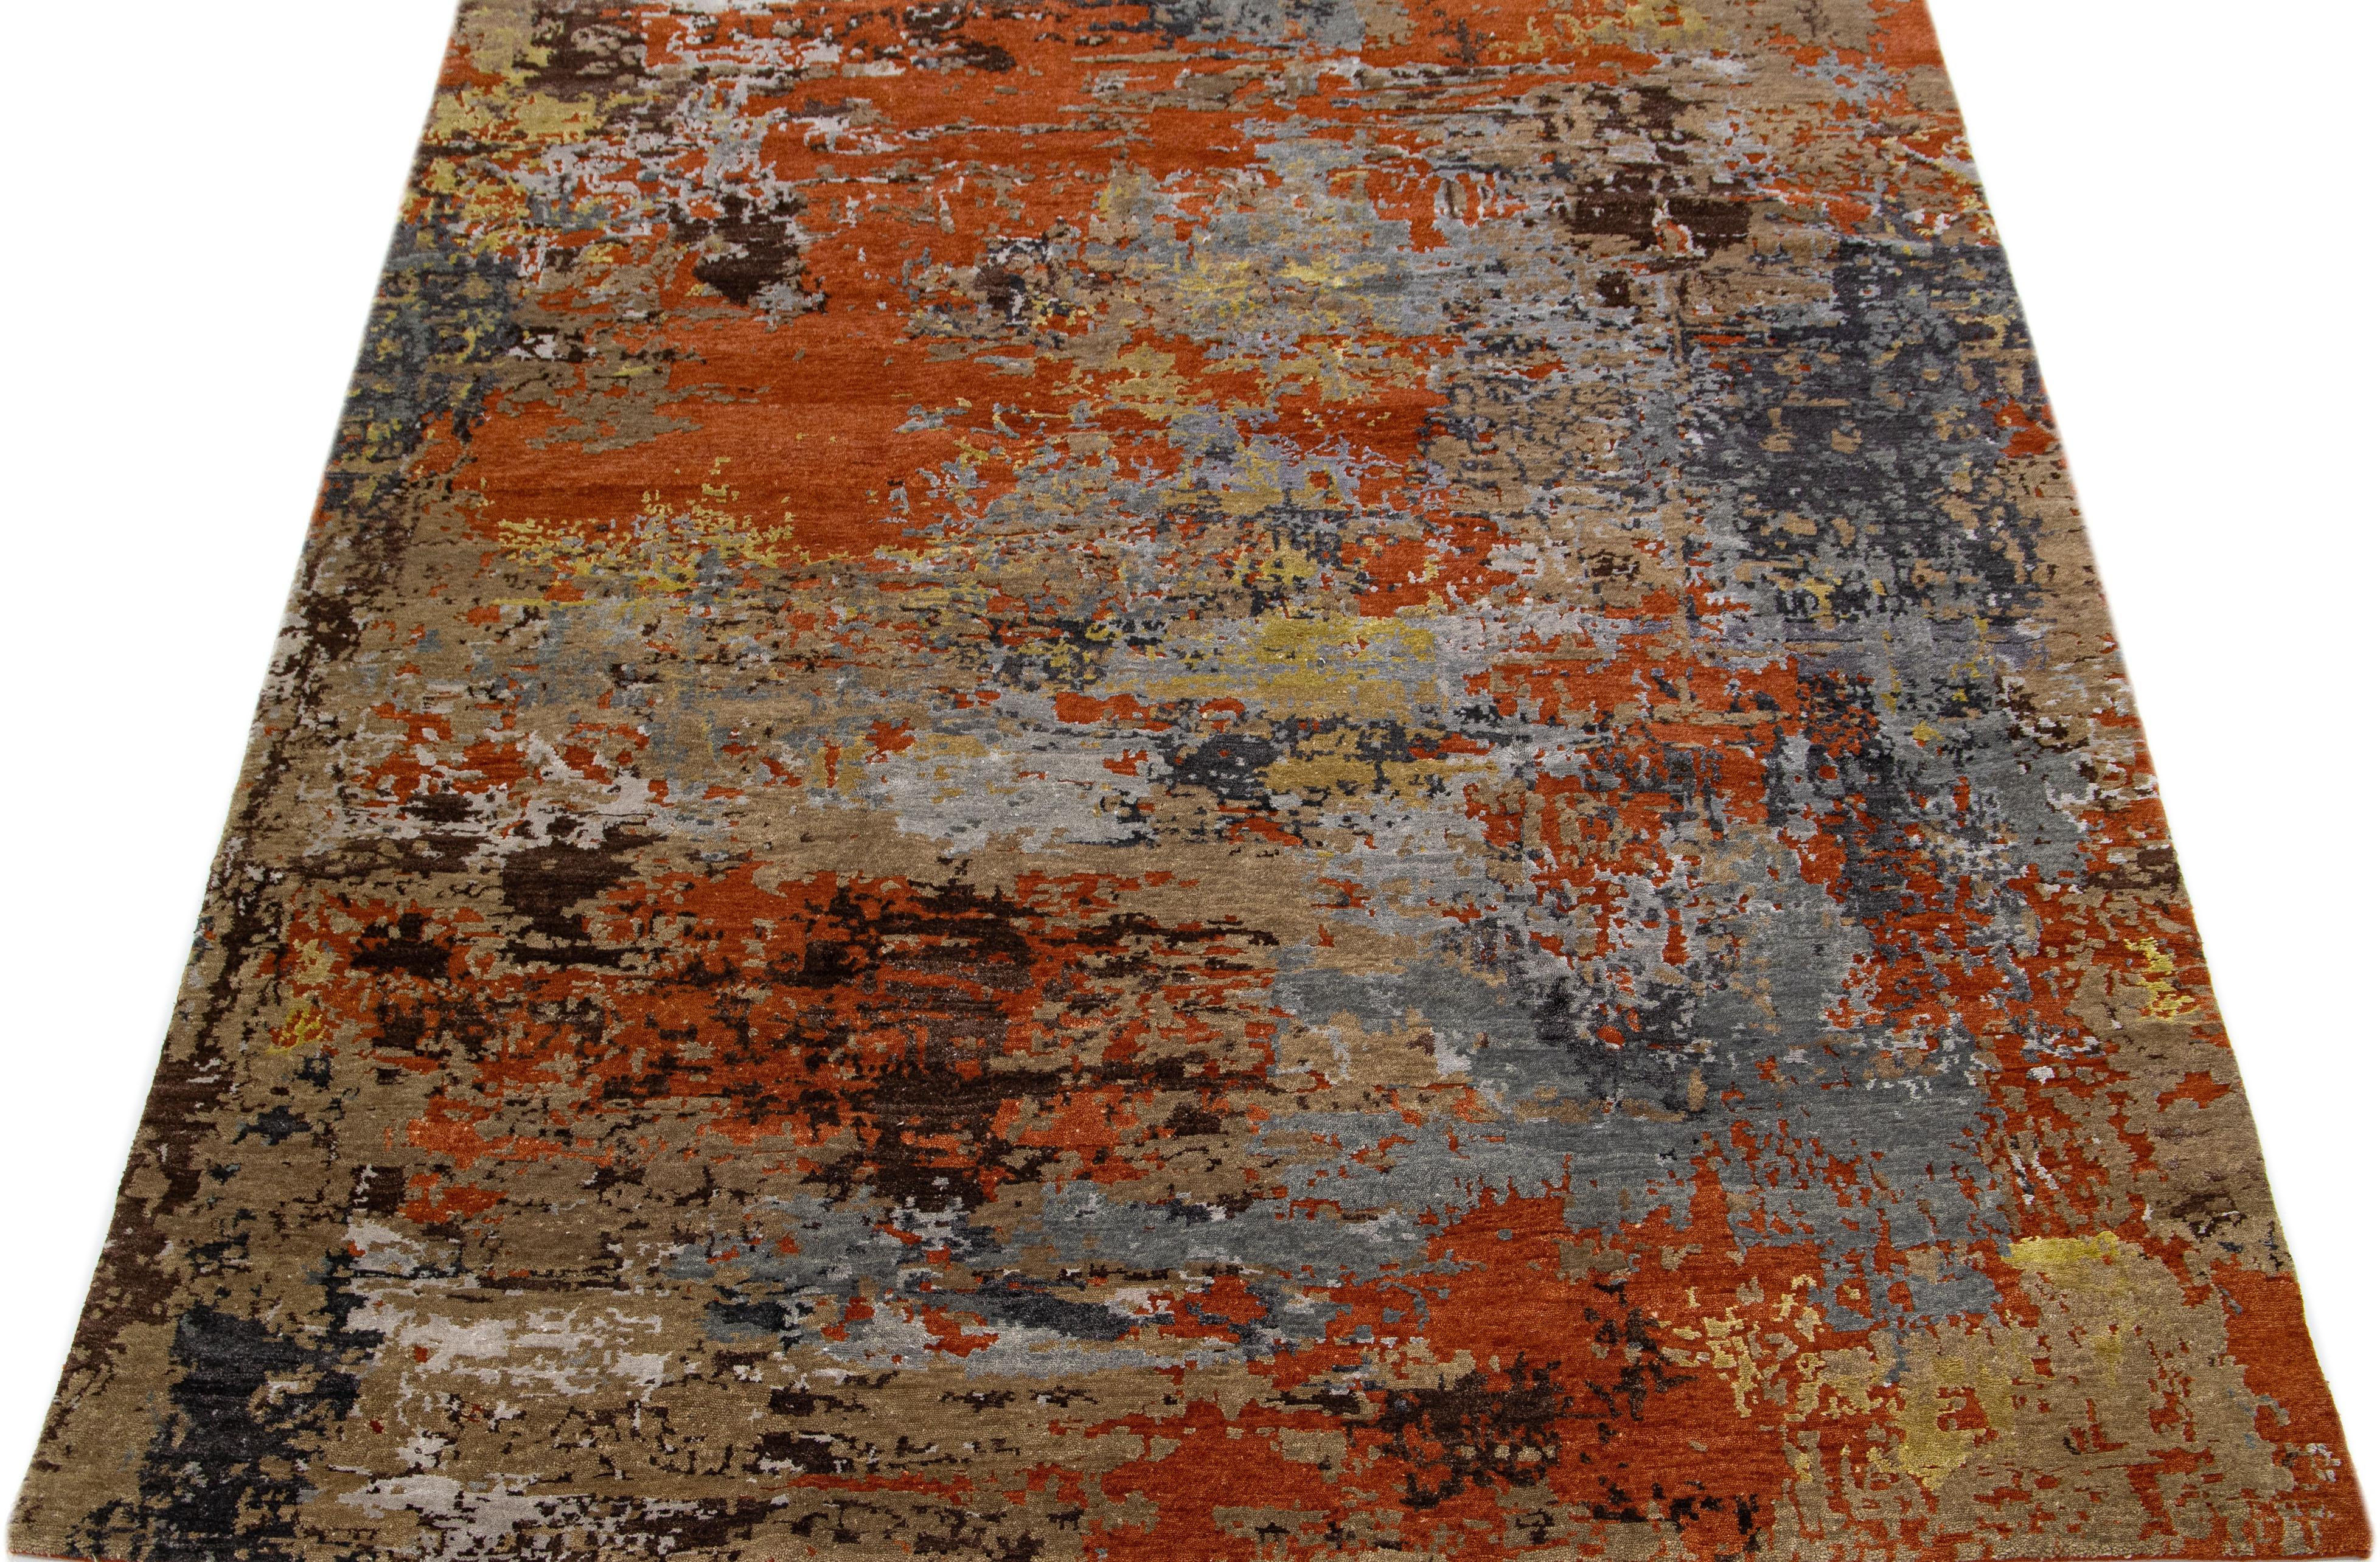 This Indian wool and silk blend rug features an orange field with an abstract pattern detailing gray and golden colors. Its composed materials provide robustness and longevity, while its ornamental design infuses any room with